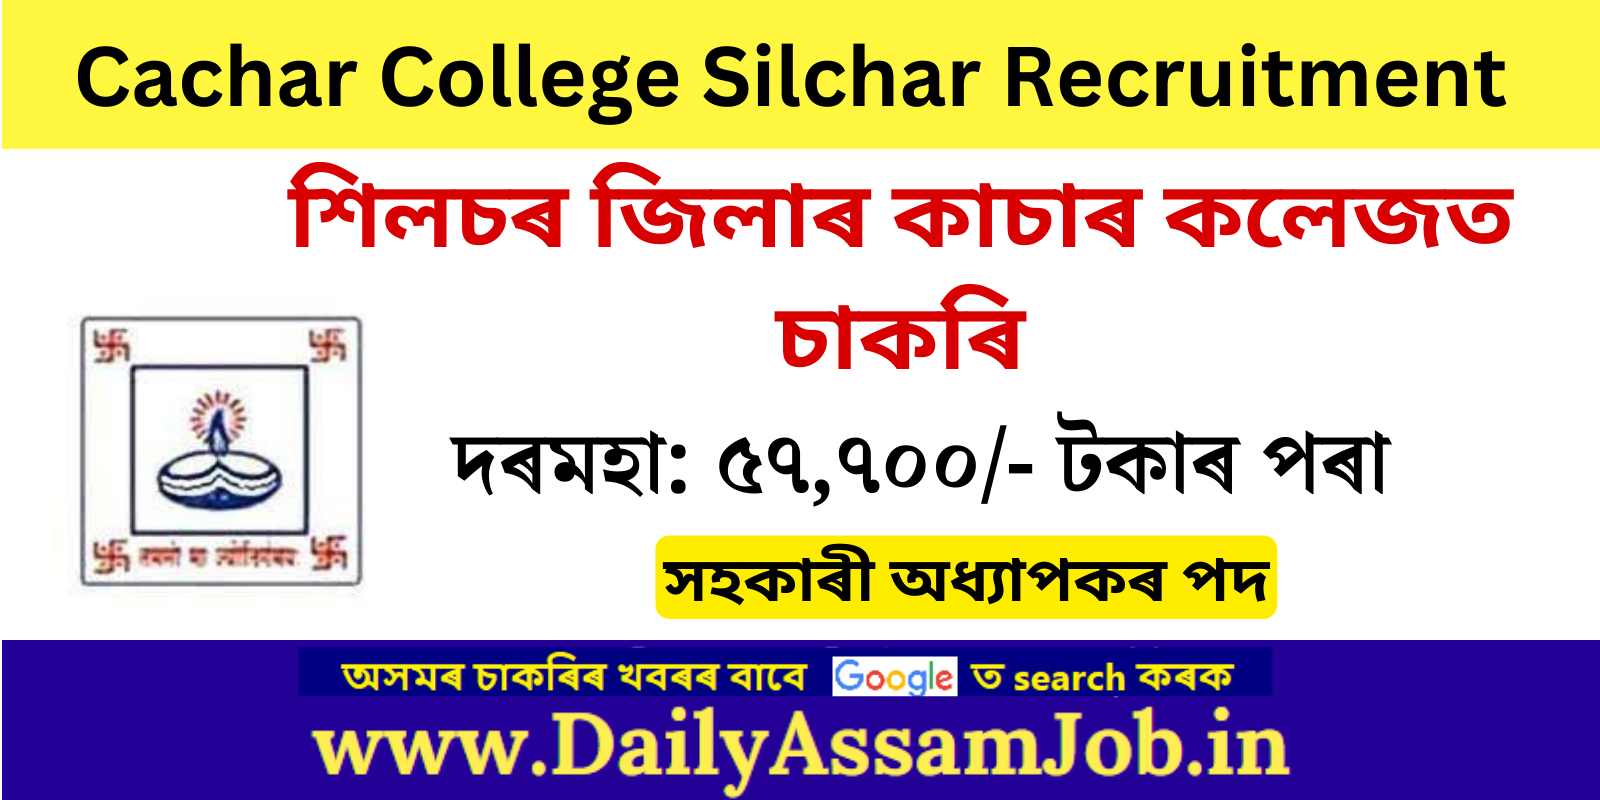 Apply for Assistant Professor Vacancies at Cachar College Silchar